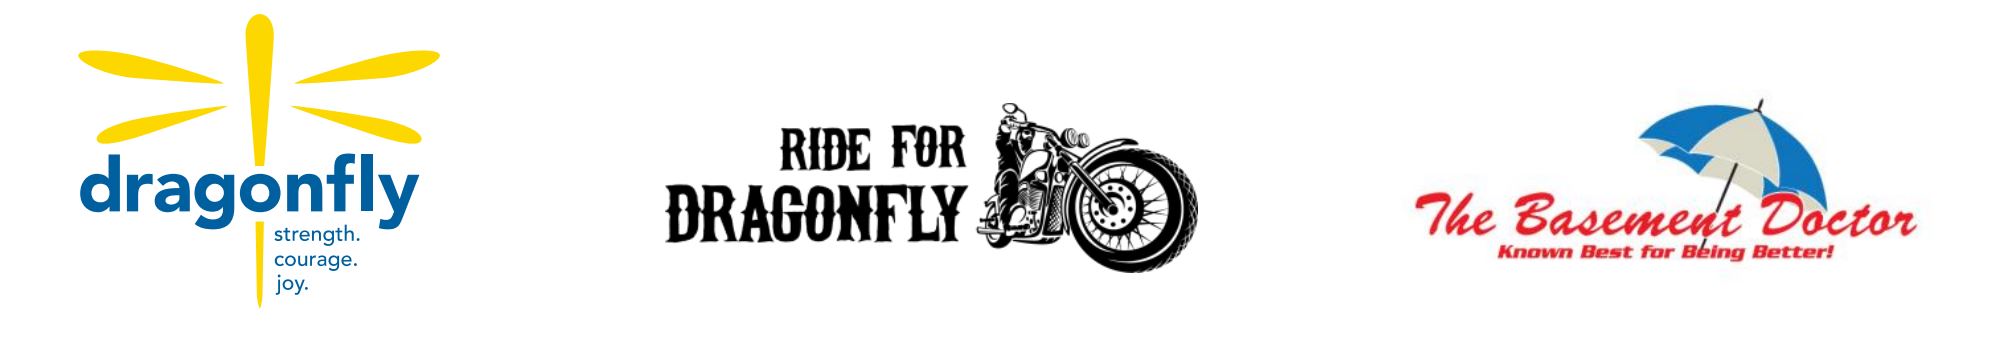 Ride for Dragonfly Logo